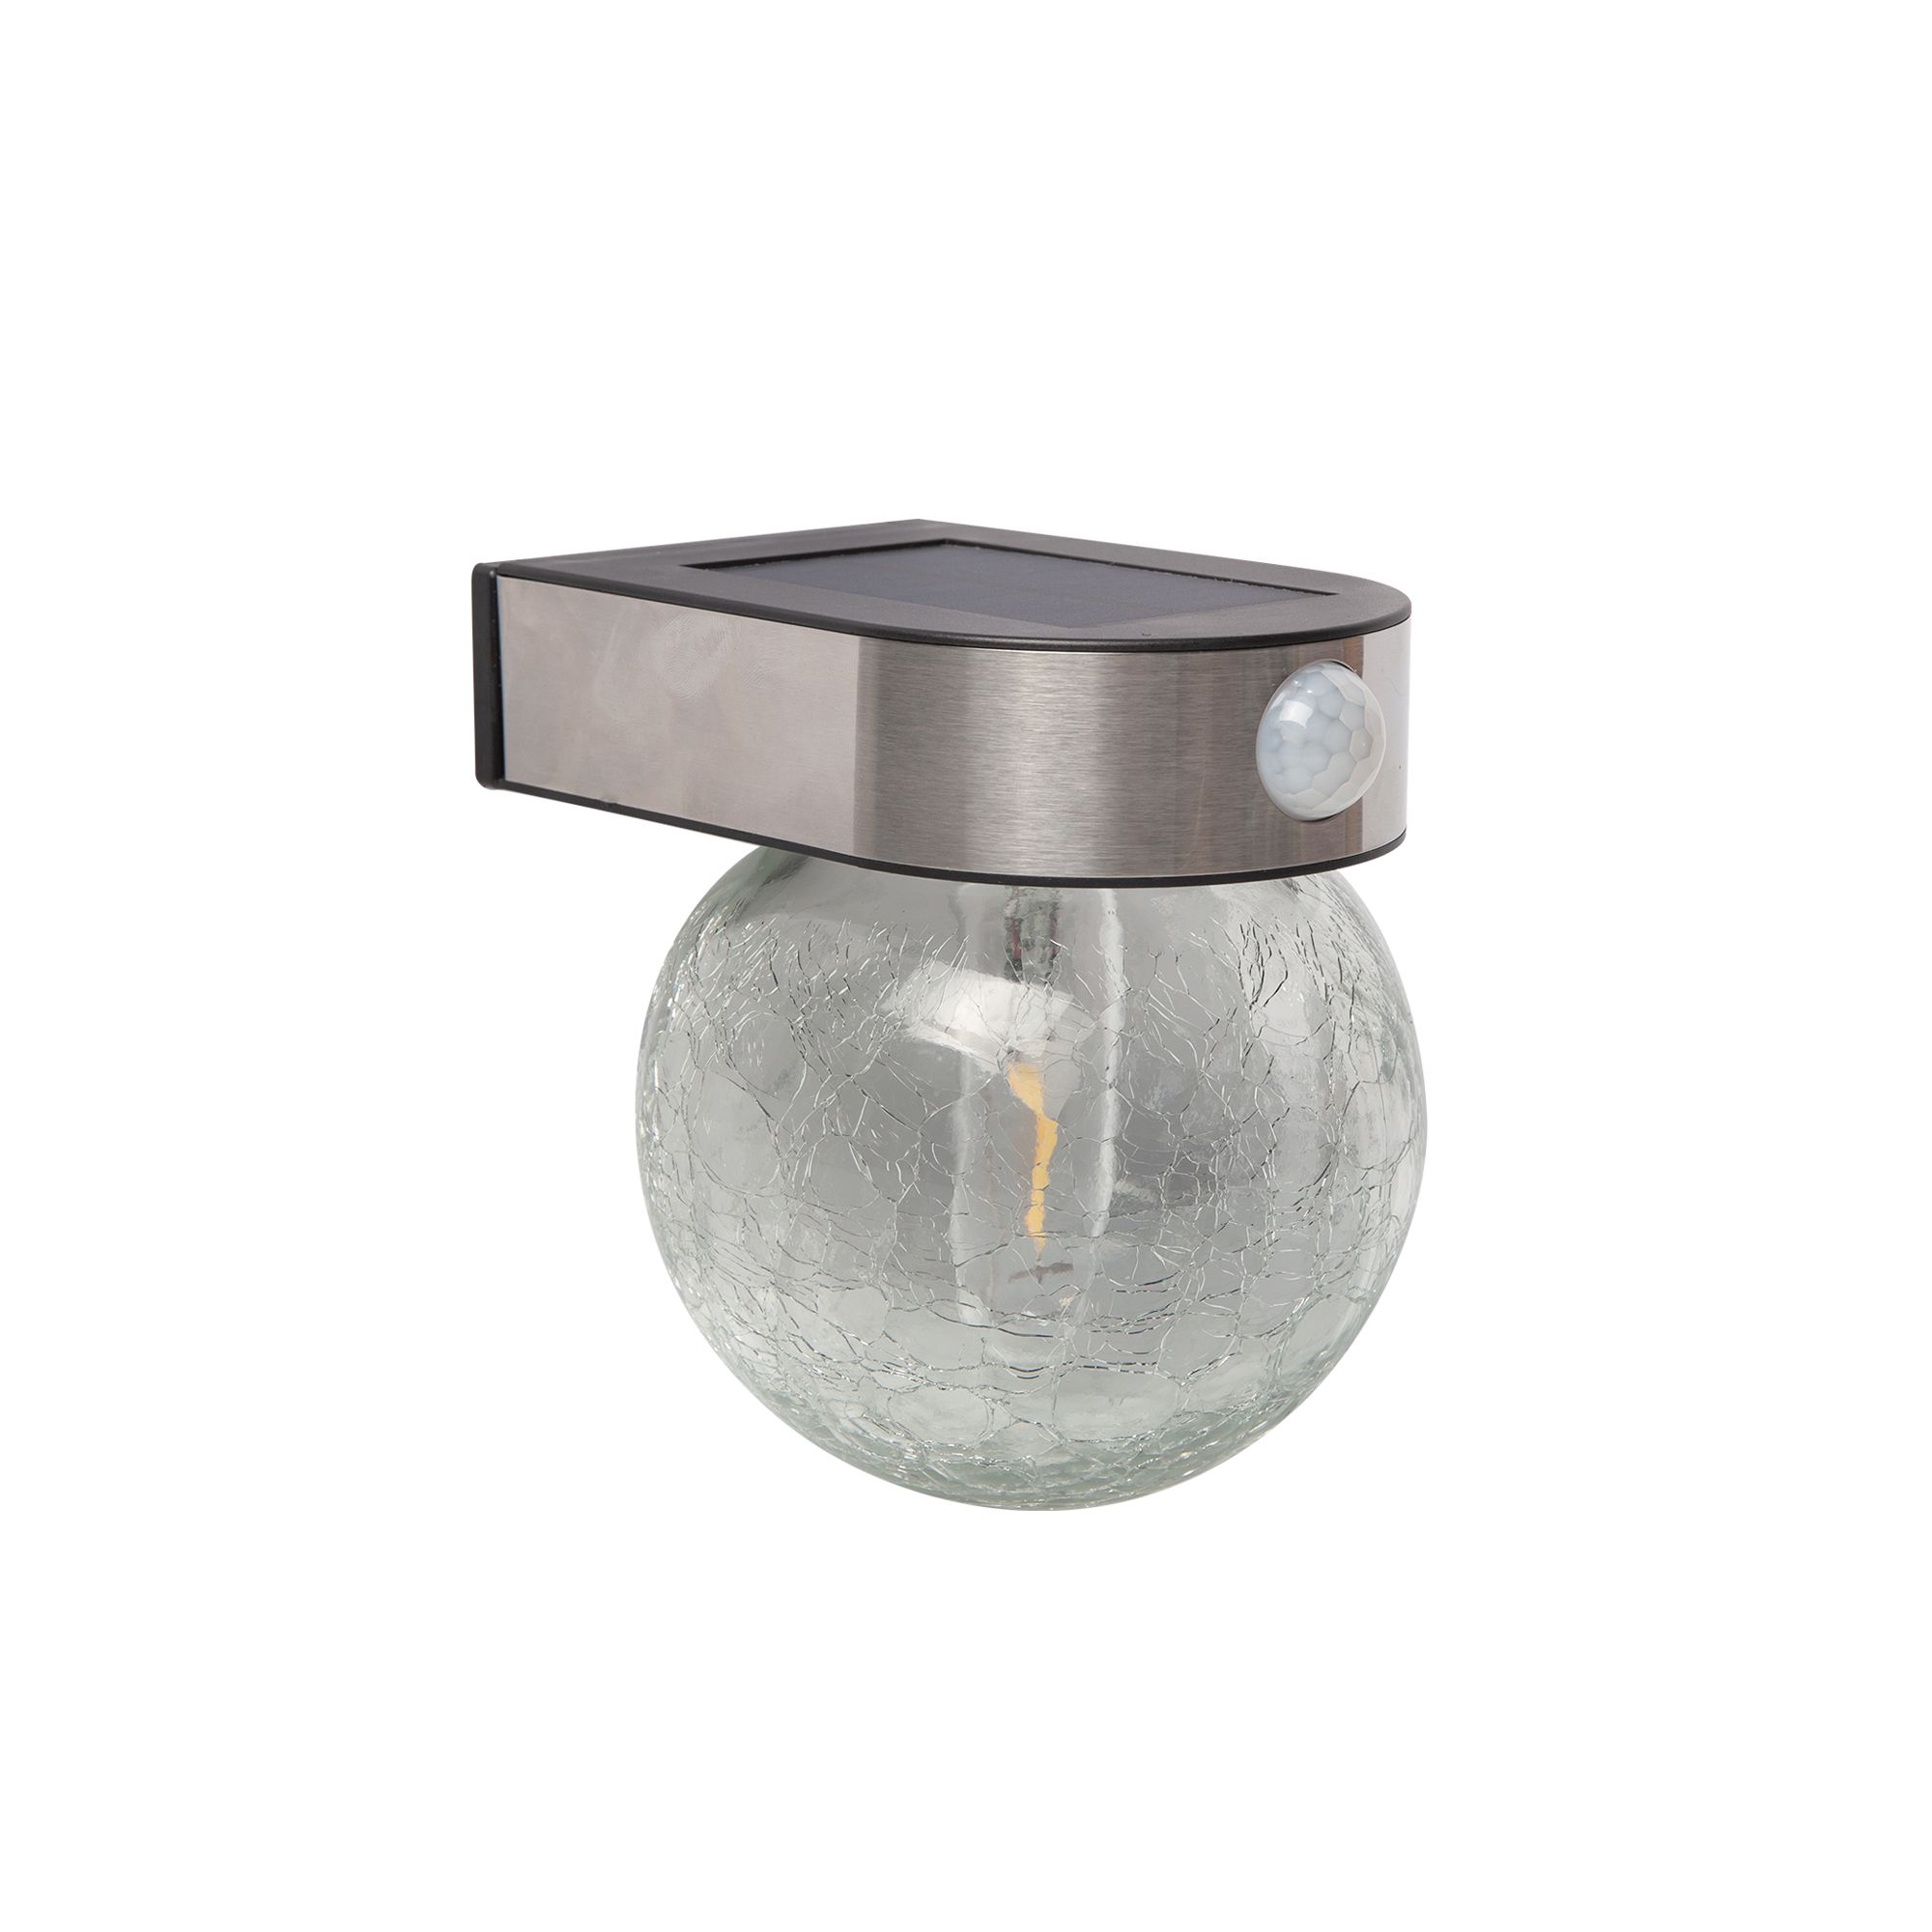 Longny Crackle glass ball Adjustable Brushed Silver effect Solar-powered Integrated LED PIR Motion sensor Outdoor Wall light